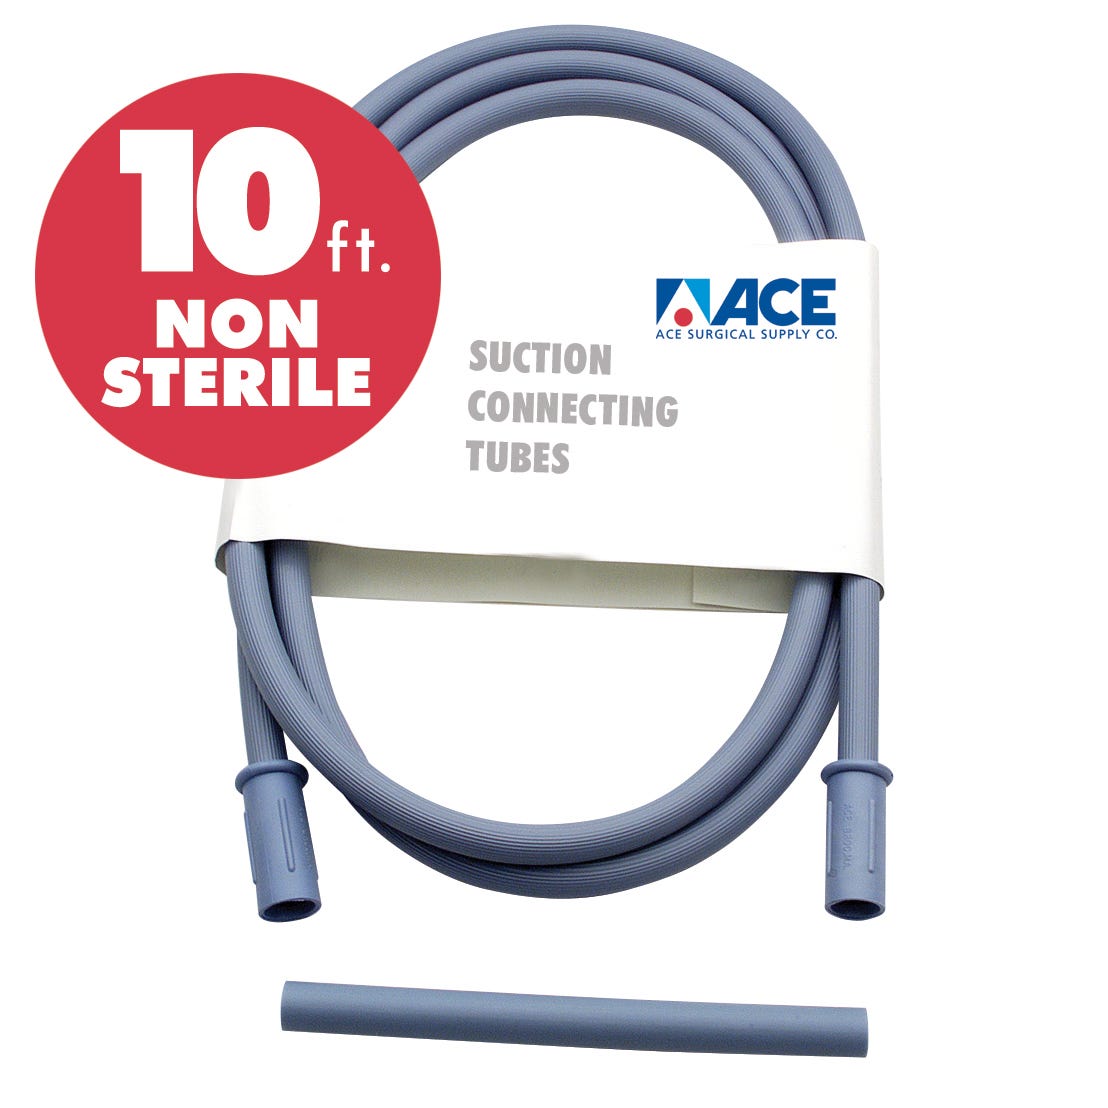 ACE Suction Connection Tubing NS -Opaque Blue with Adapter , 10' long, 1/4" I.D. -50/Case